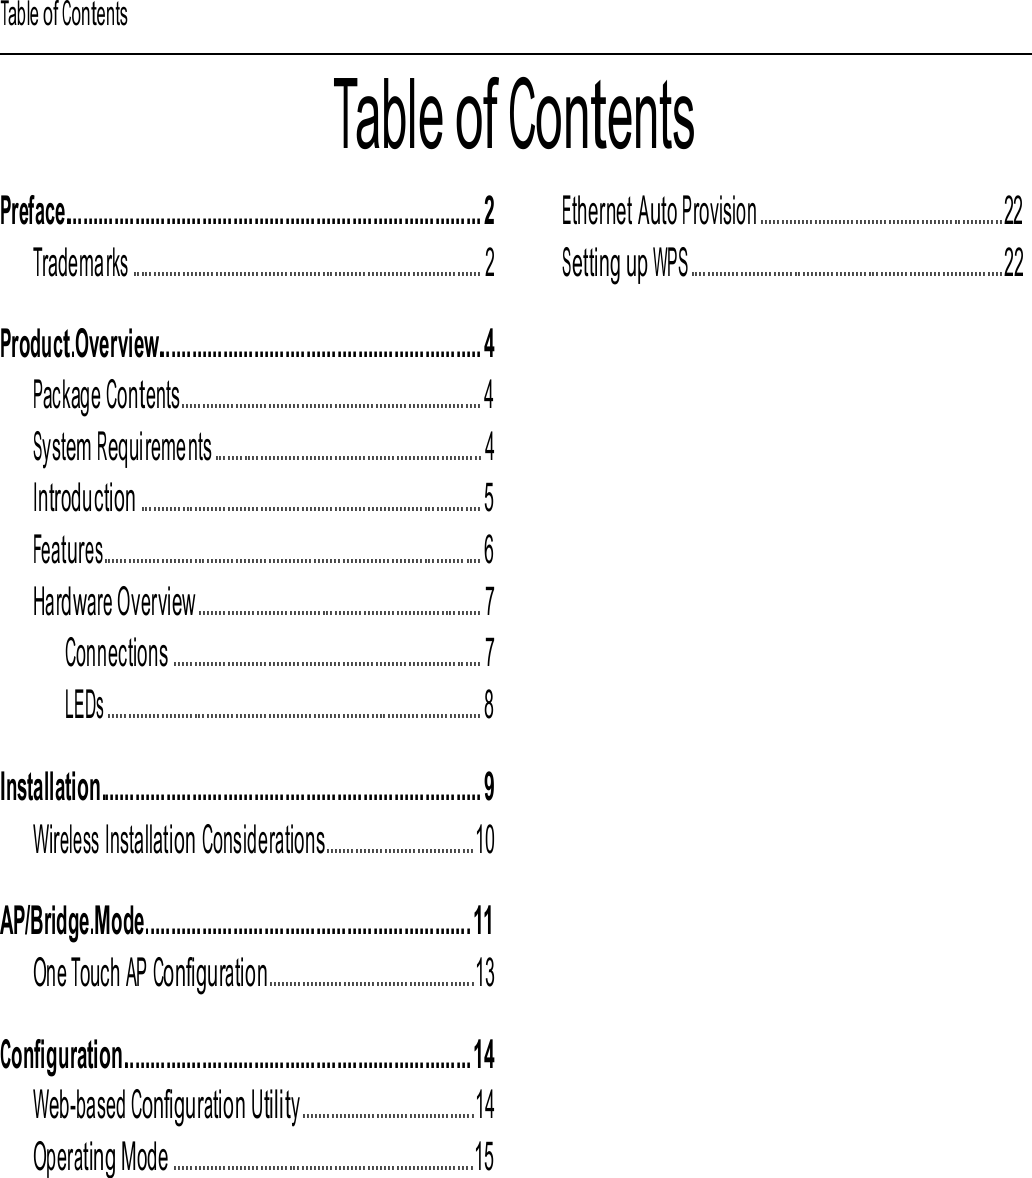 Table of Contents Table of Contents Preface................................................................................. 2 Trademarks ..................................................................................... 2 Ethernet Auto Provision ...........................................................22 Setting up WPS............................................................................22 Product.Overview............................................................... 4 Package Contents......................................................................... 4 System Requirements ................................................................. 4 Introduction ................................................................................... 5 Features............................................................................................ 6 Hardware Overview ..................................................................... 7 Connections ........................................................................... 7 LEDs ........................................................................................... 8  Installation.......................................................................... 9 Wireless Installation Considerations....................................10 AP/Bridge.Mode............................................................... 11 One Touch AP Configuration..................................................13 Configuration.................................................................... 14 Web-based Configuration Utility ..........................................14 Operating Mode .........................................................................15 Network Settings ................................................................16 Wireless Settings .................................................................17 WPS Settings ........................................................................18 Site Survey.............................................................................19 Remote Management .......................................................20 Administration ................................................................21 Software Upgrade .........................................................21 CellPipe 7130 RG 1Ez.N0001 3 